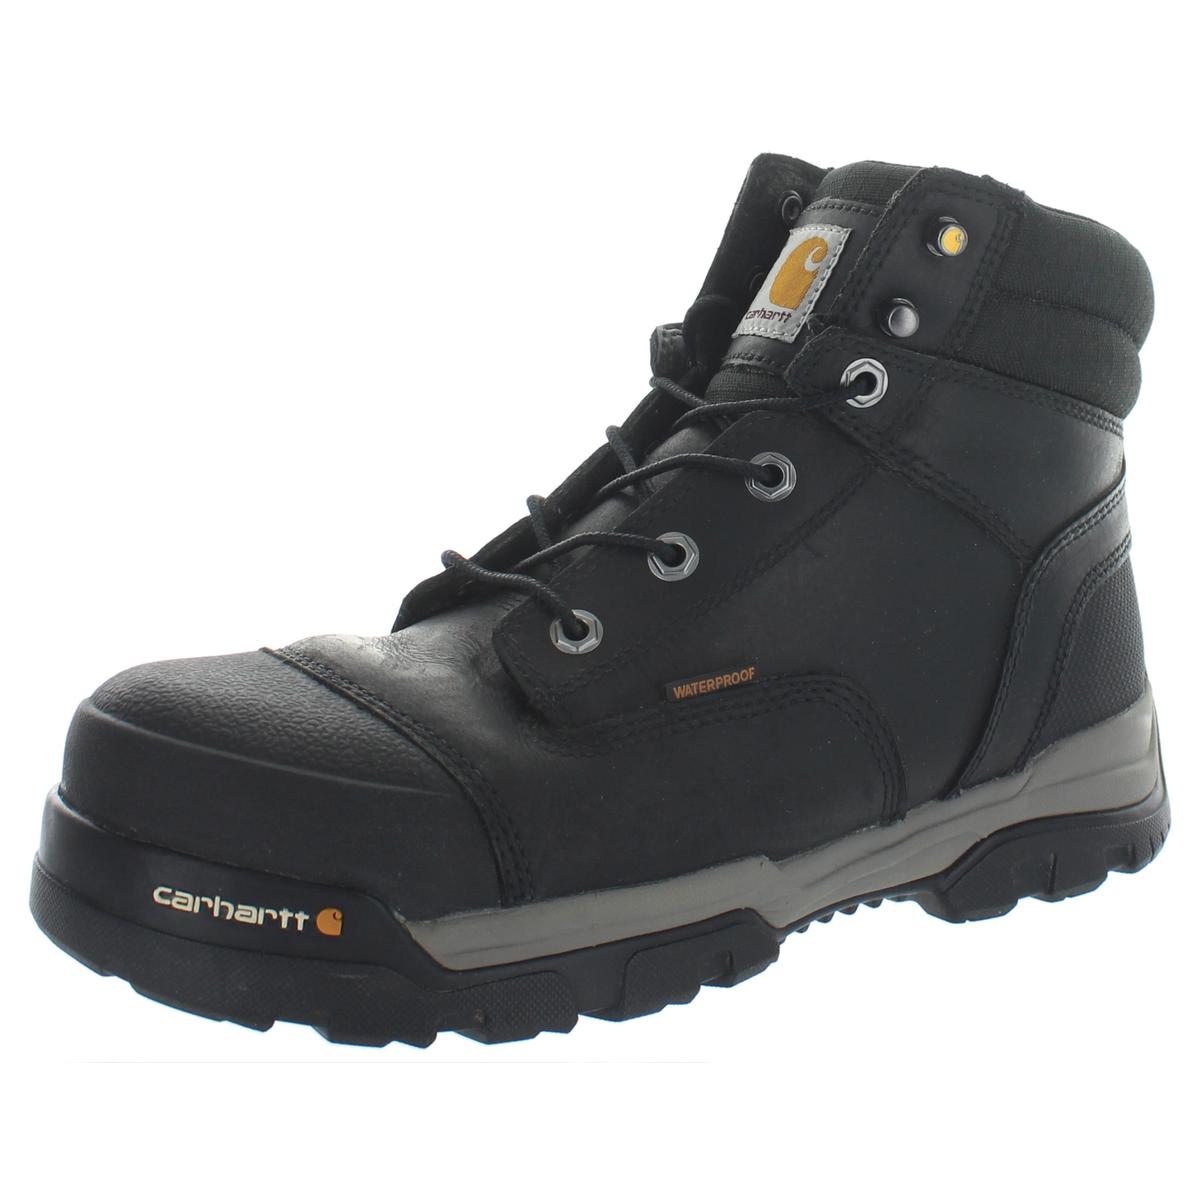 Carhartt Mens Black Leather Lace Up Work Boots Shoes 9 Medium (D) BHFO ...